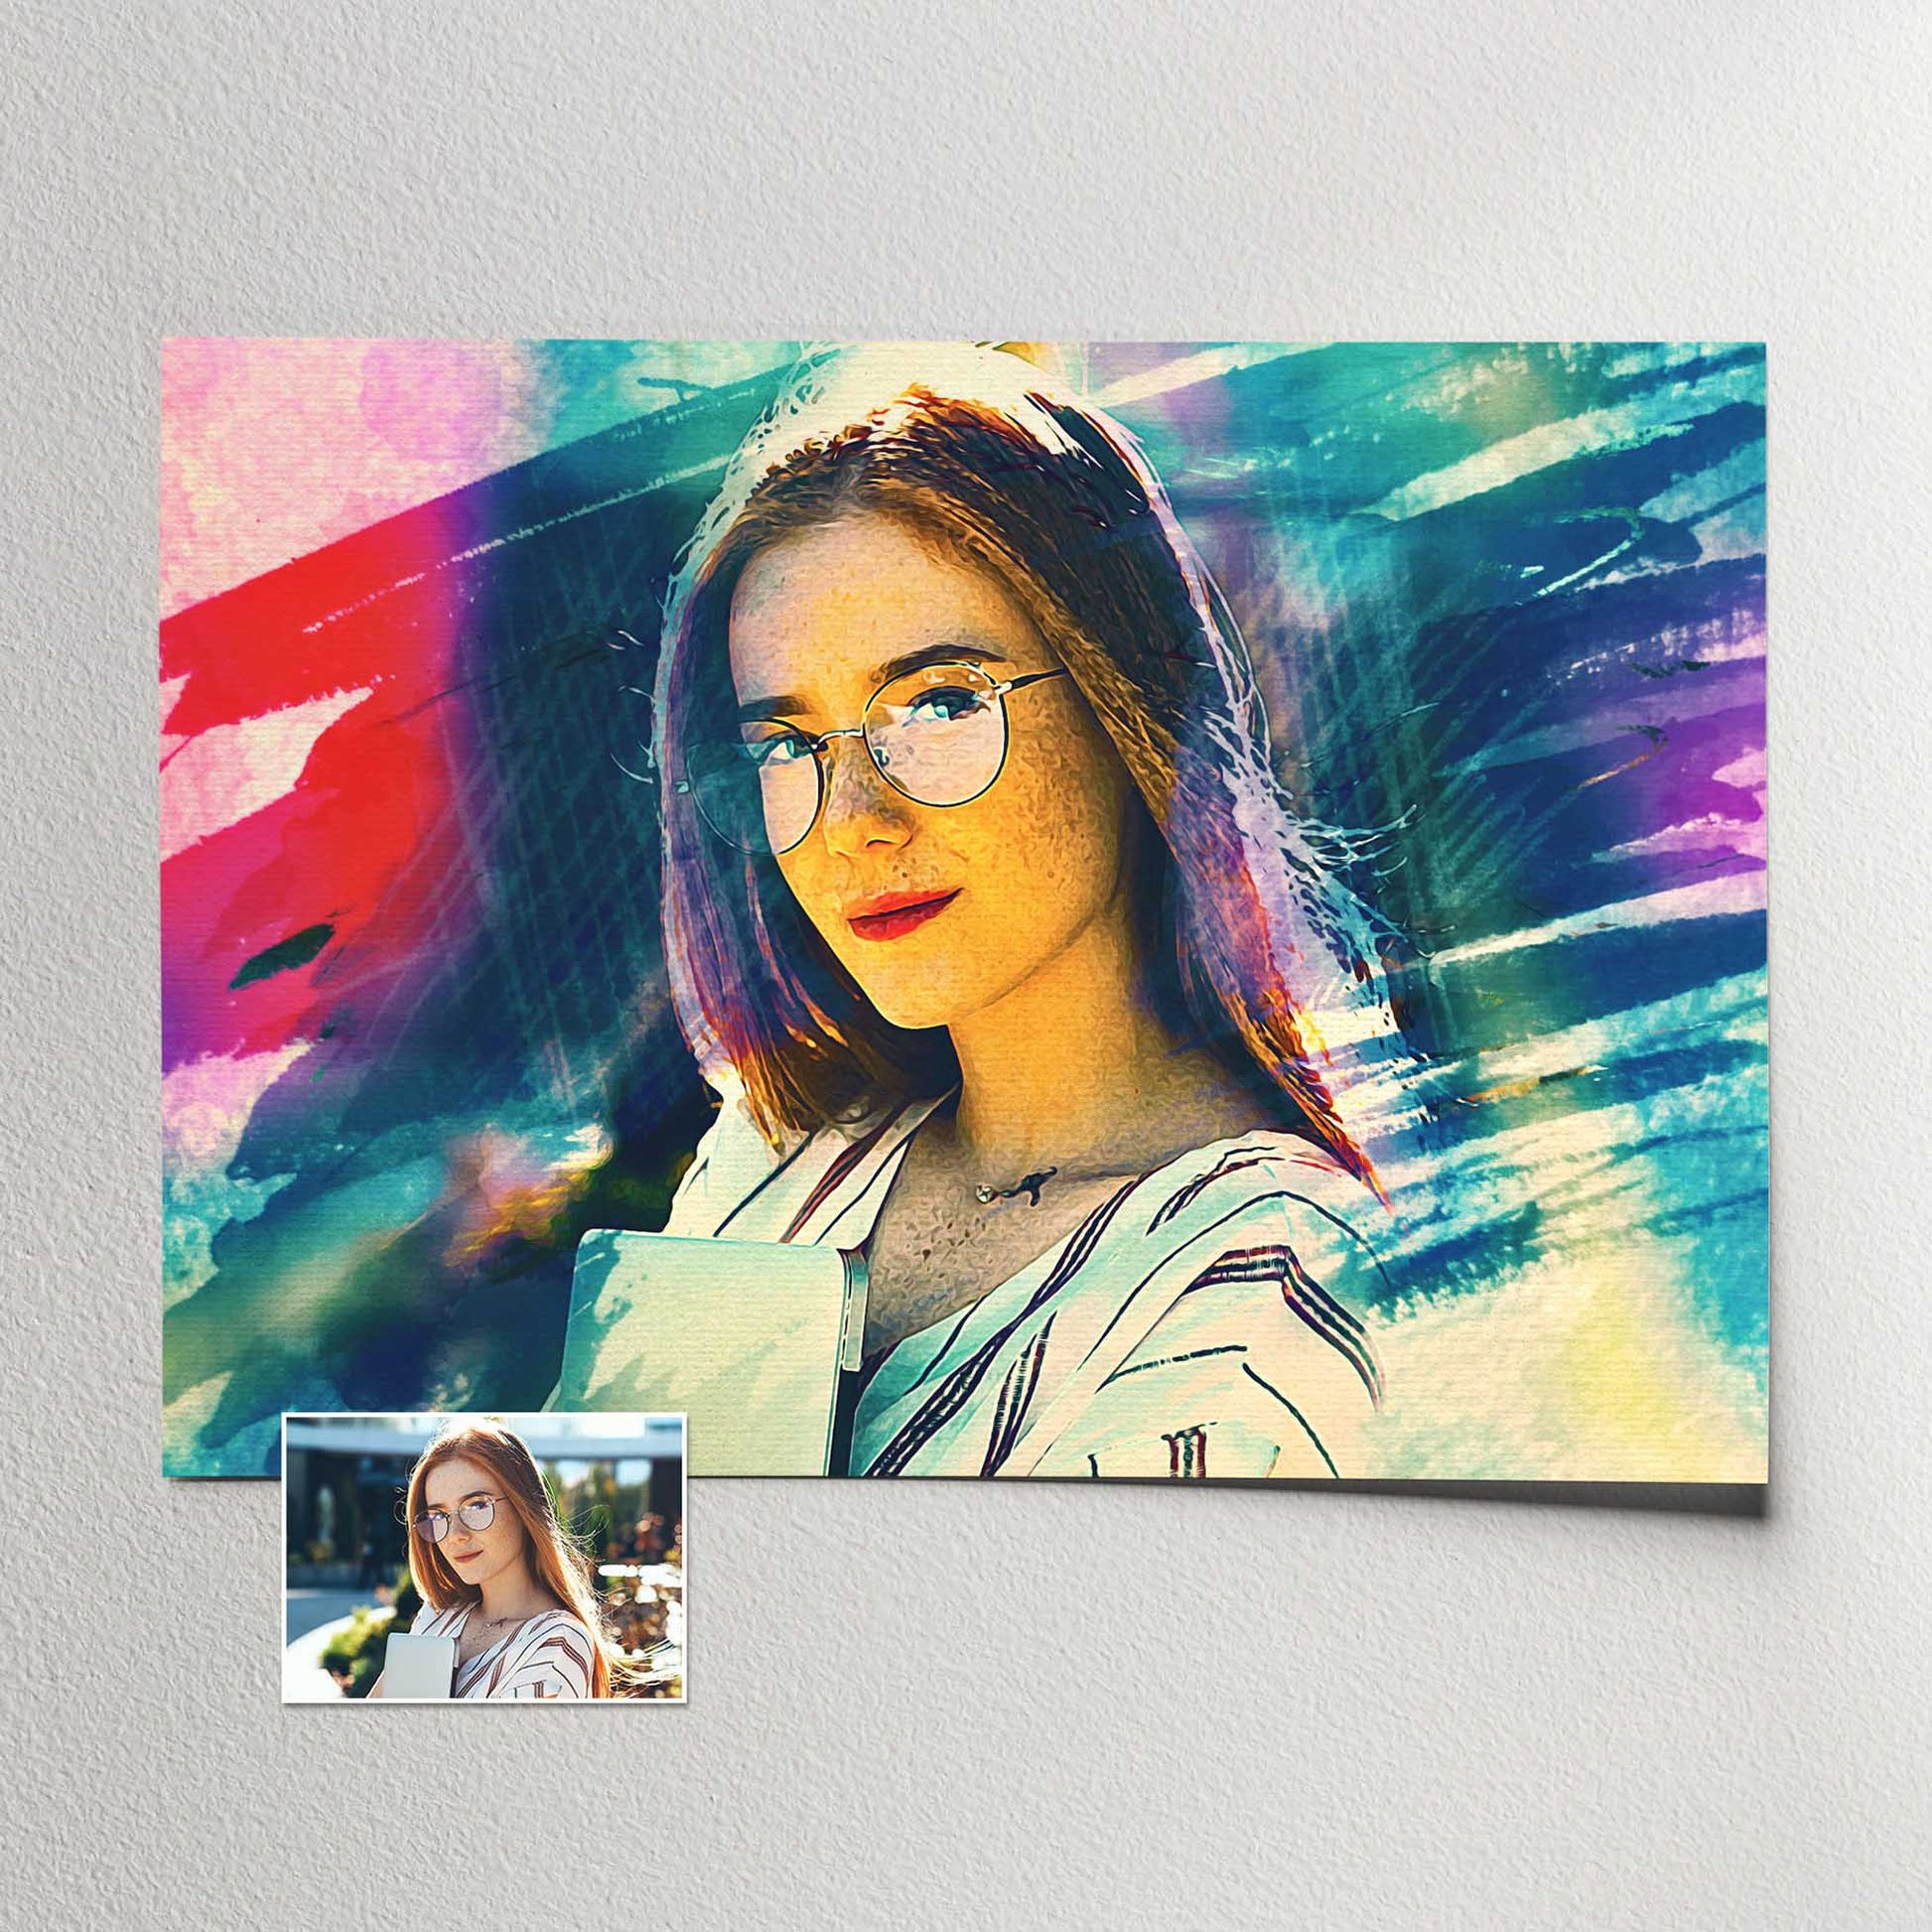 Turn your memories into a Personalised Brush Painting Print, crafted from your photo with a captivating watercolor style and brushstroke effect. The beautiful hues of purple, pink, and blue create a trendy and cool look